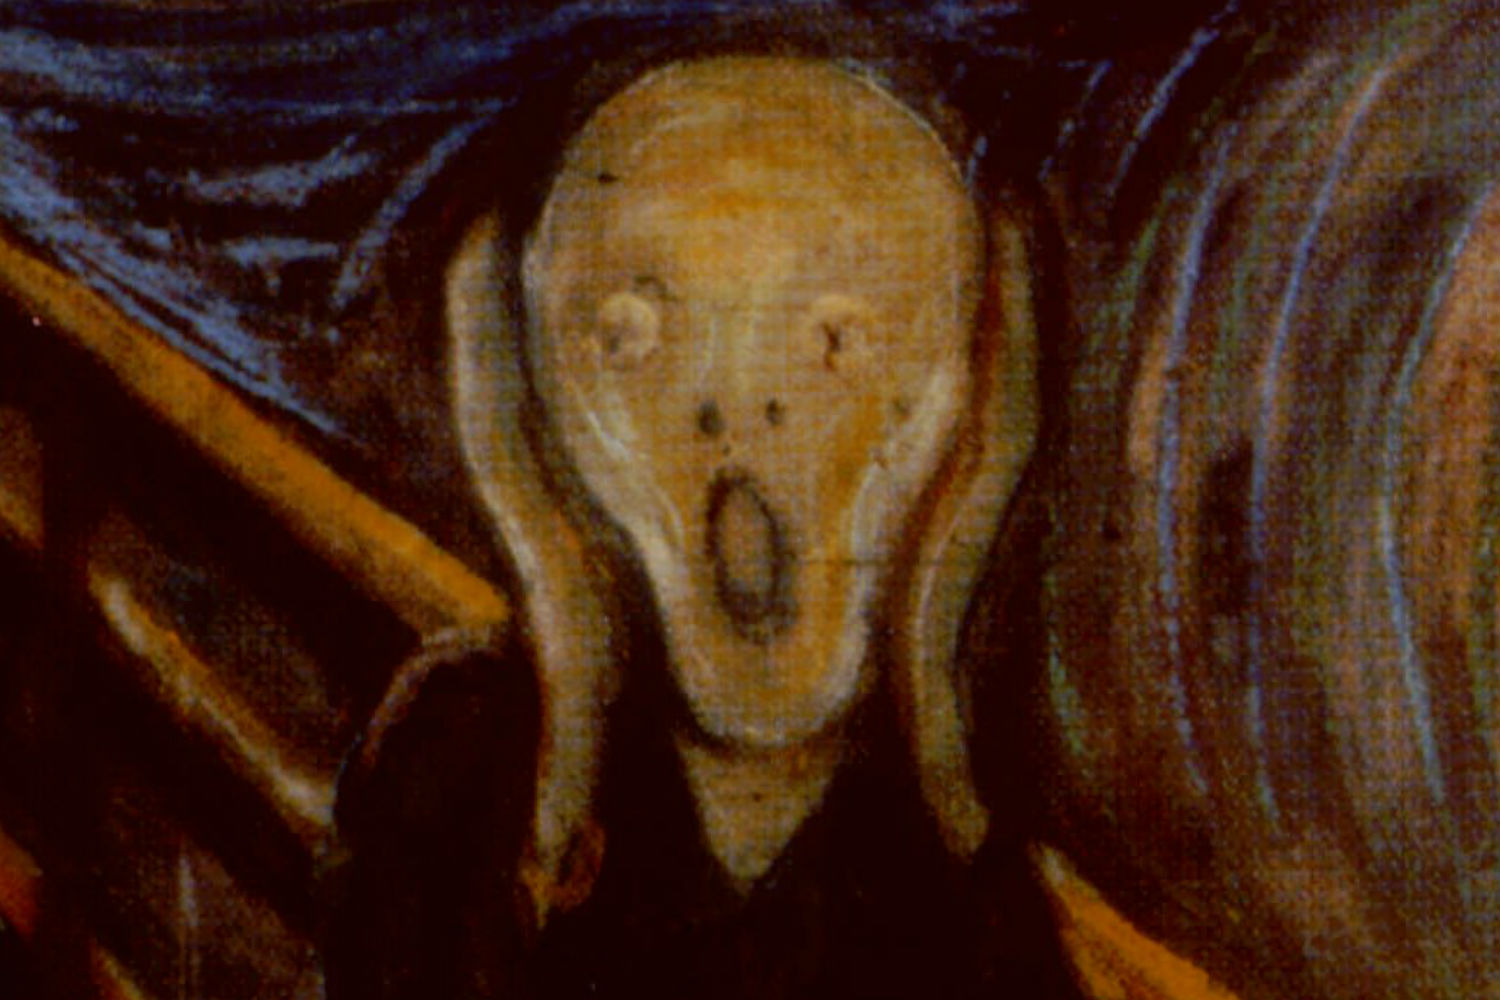 Since crime in Denver looks about the same as it did this time last year, pre-legal recreational marijuana sales, why the panicky stories? (Edvard Munch's "The Scream," AP file)